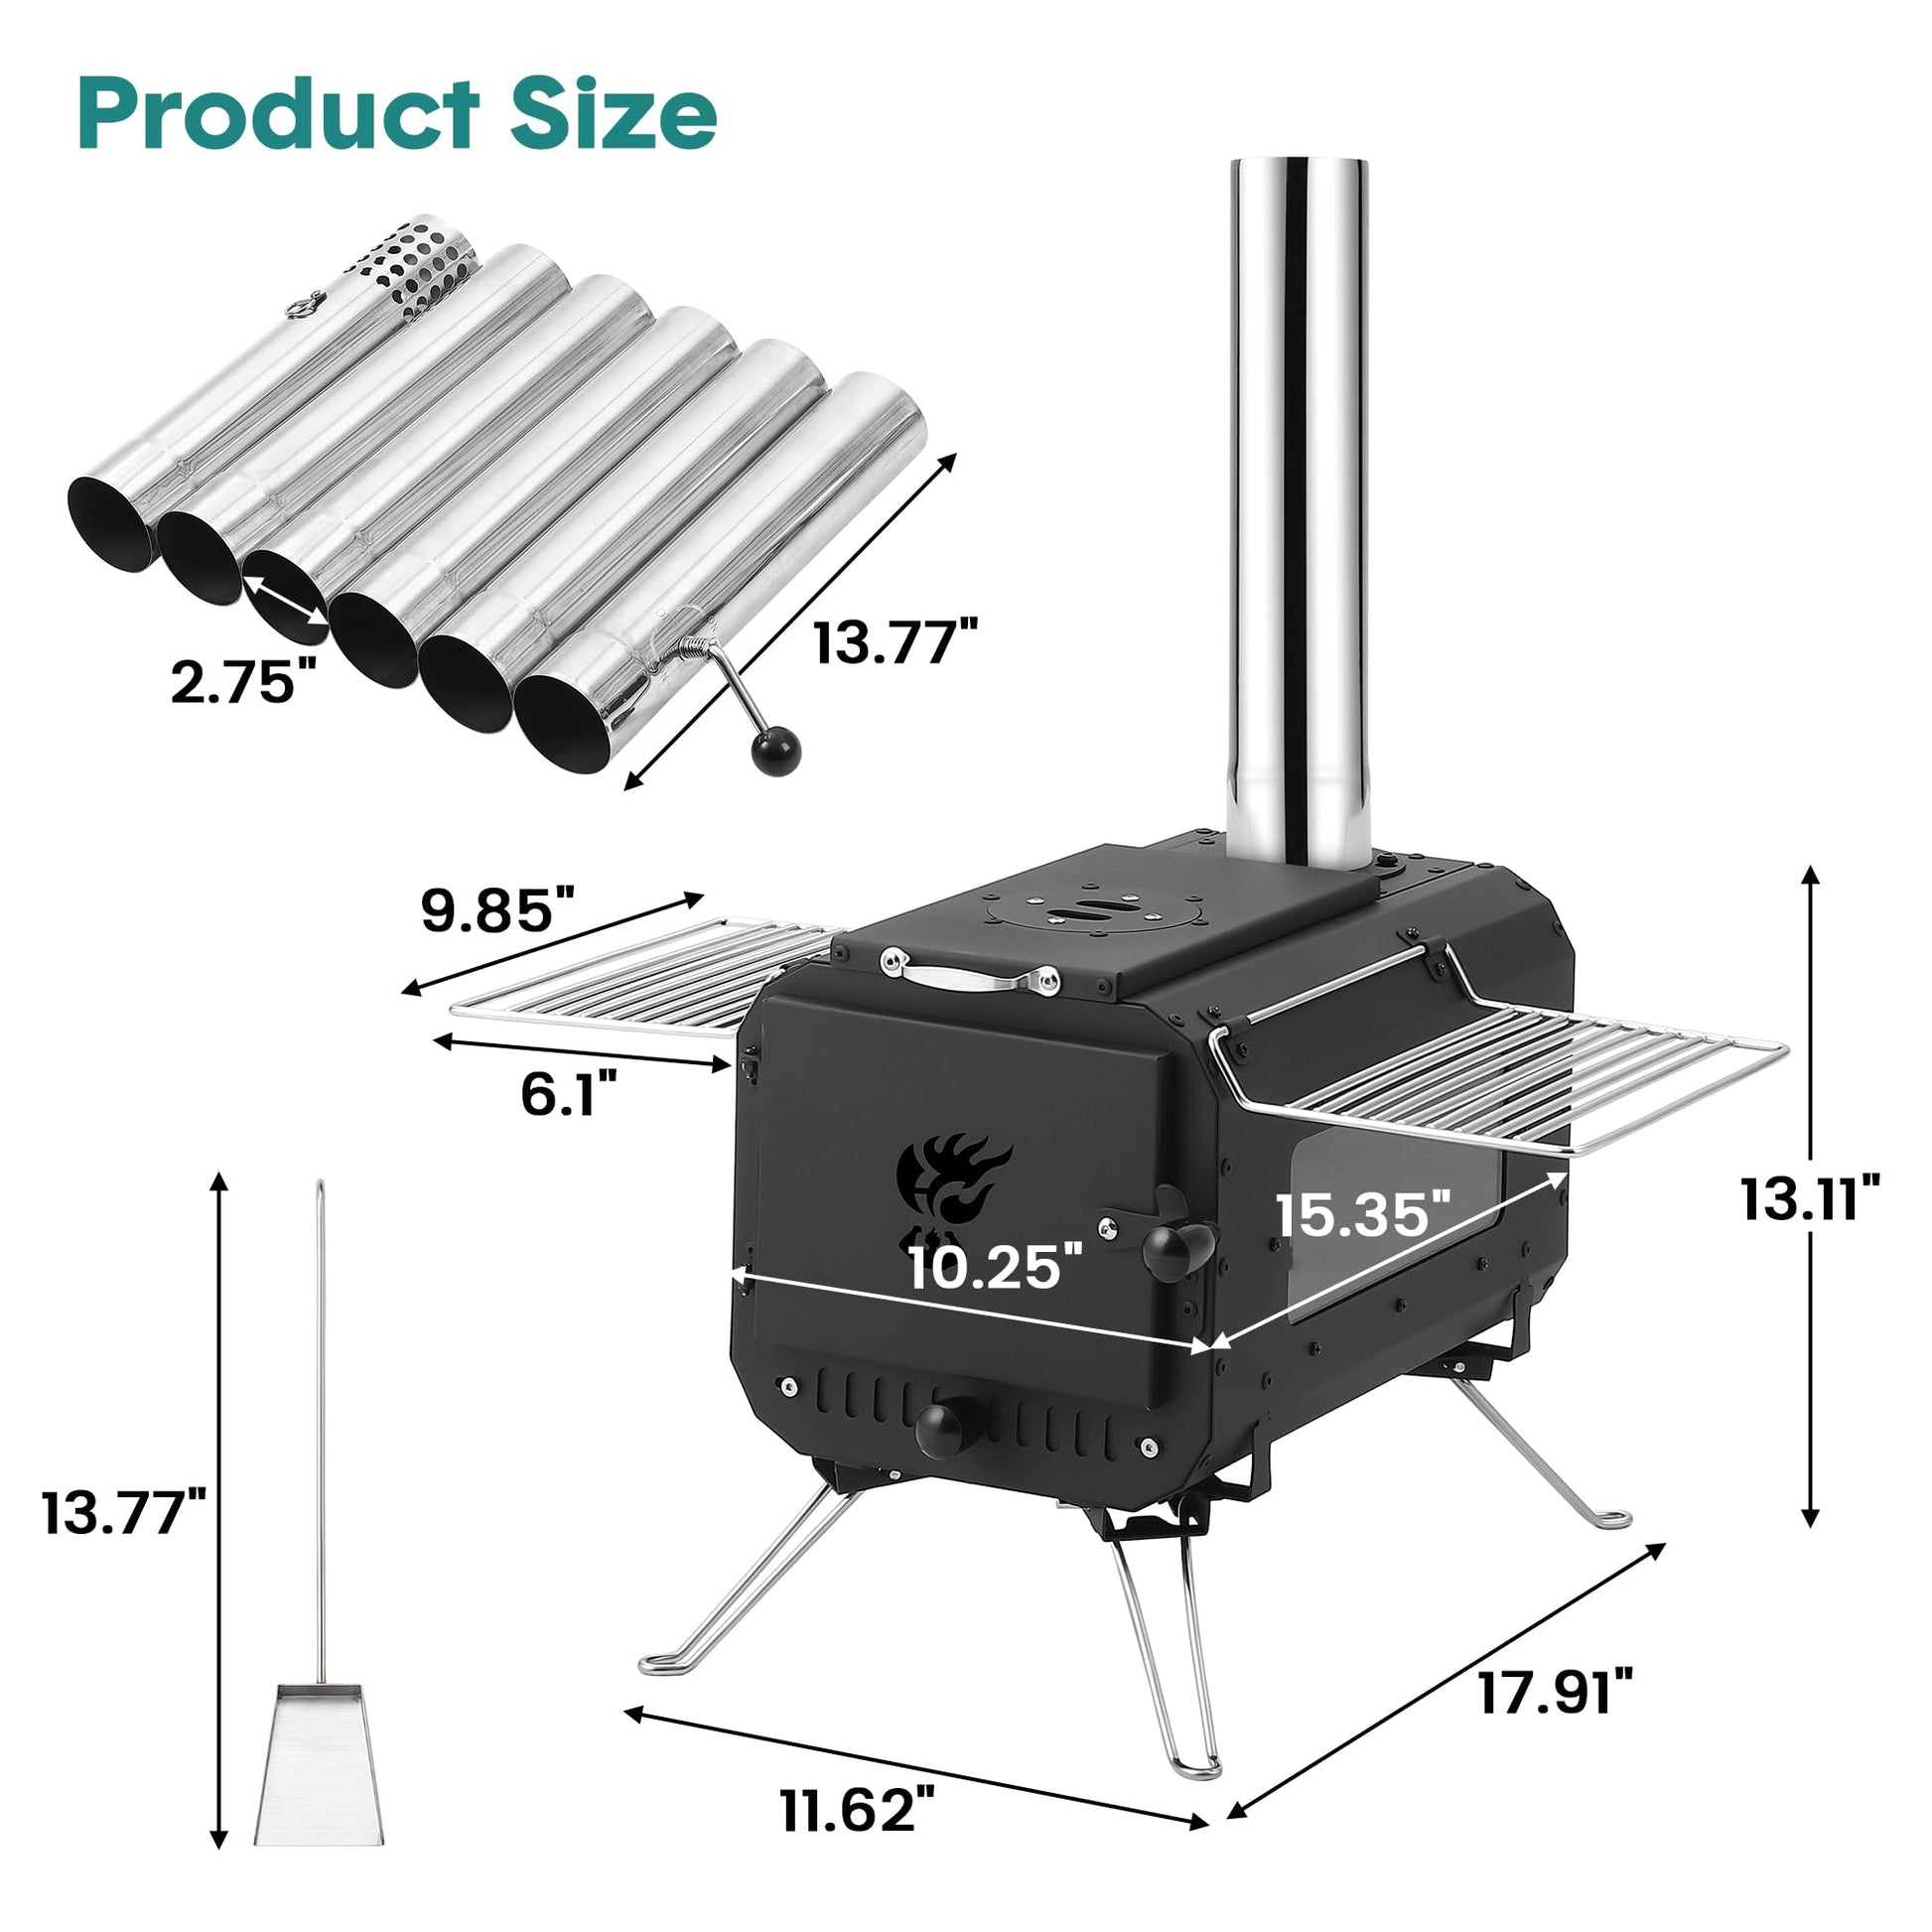 Outdoor Portable Wood Stove, Tent Stove,Wood Burning Stove for Camping,Cast Iron Wood Stove,Tent Heaters for Camping, Includes Chimney Pipes ans View Glass,Ice-fishing, Cookout, Hiking, Travel